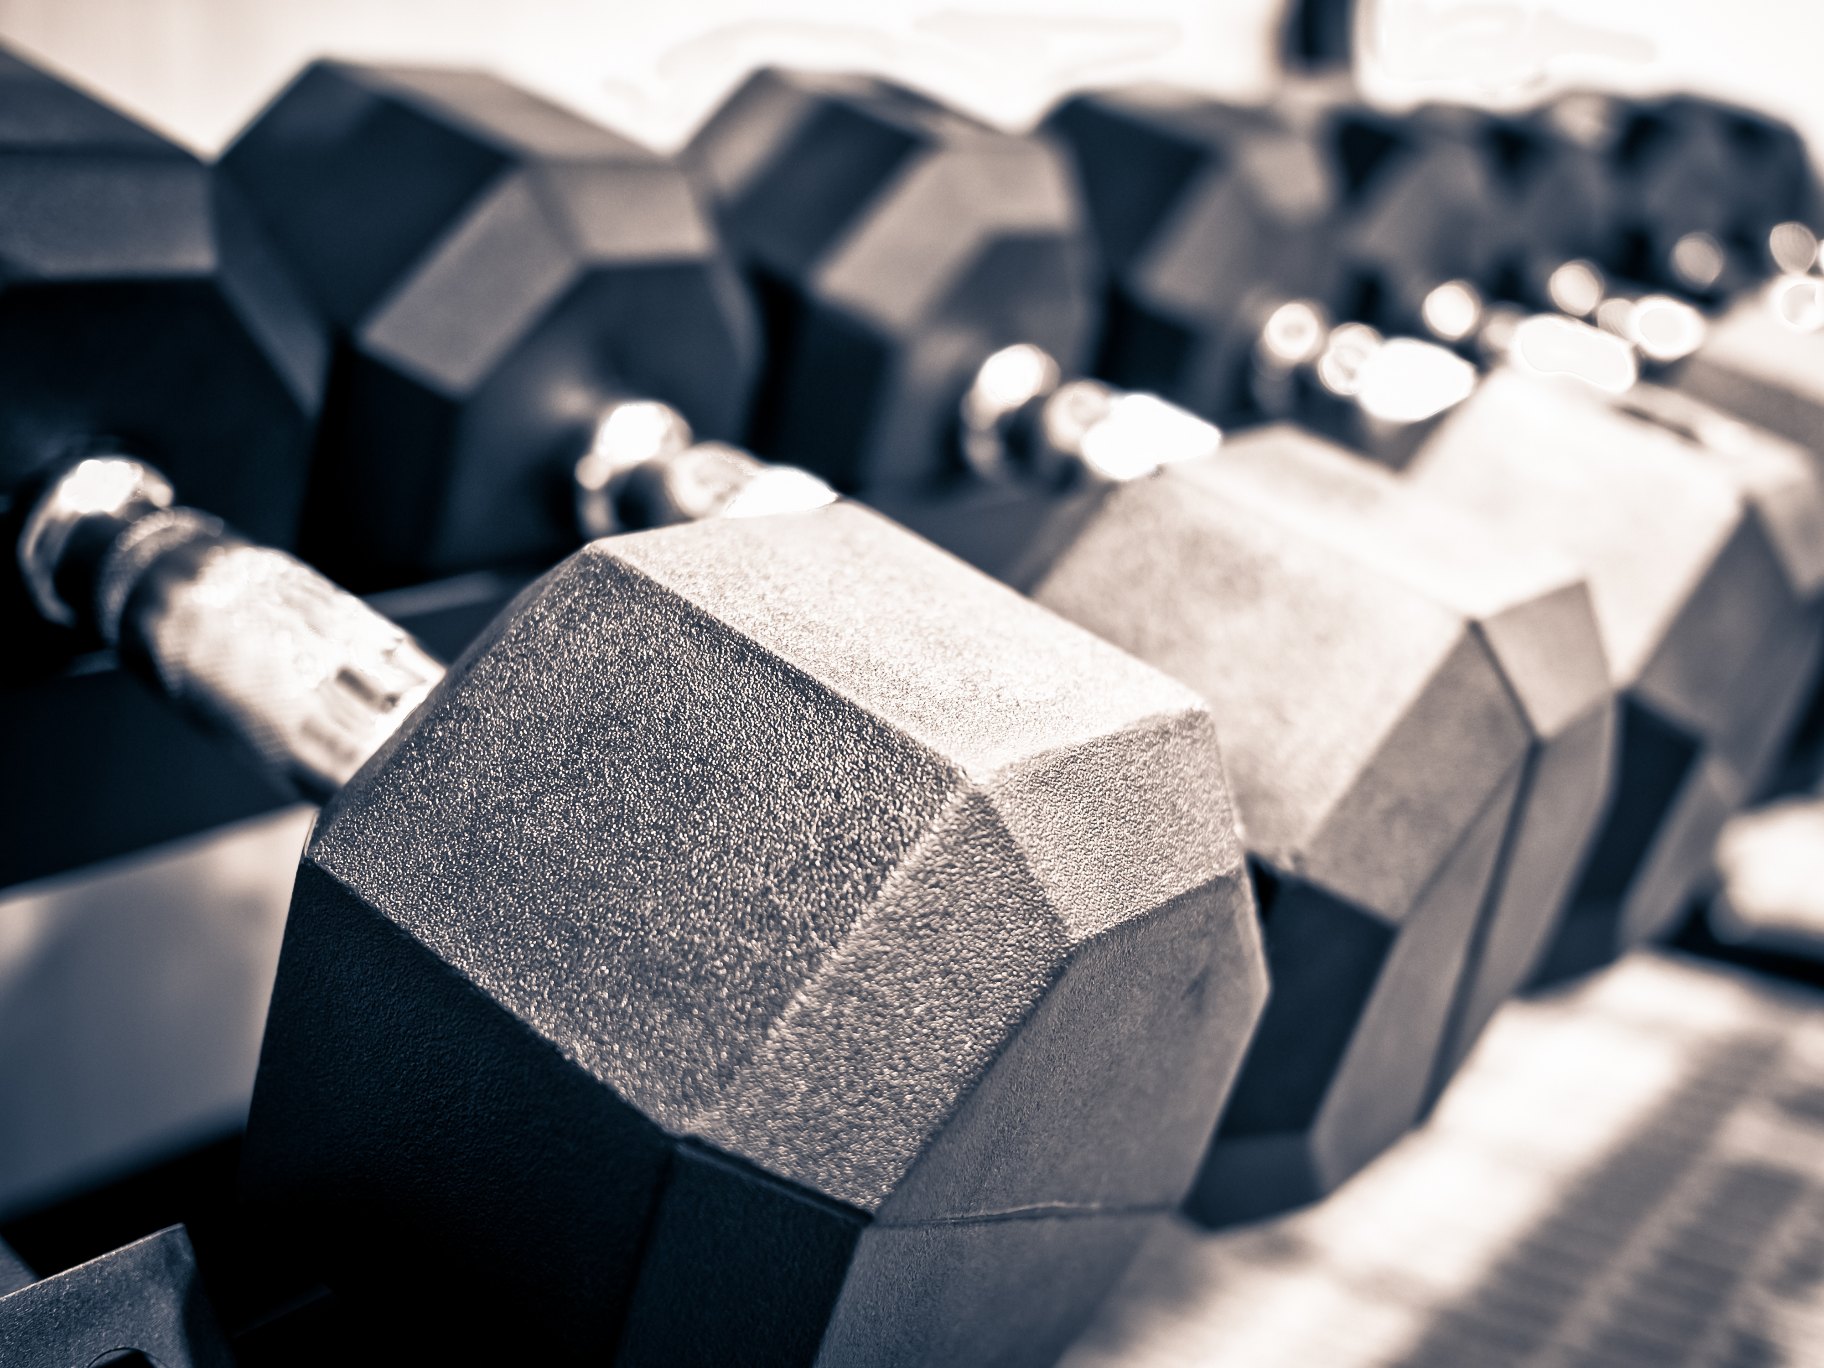 Rack of hand free weight dumbbells at a healthclub gym